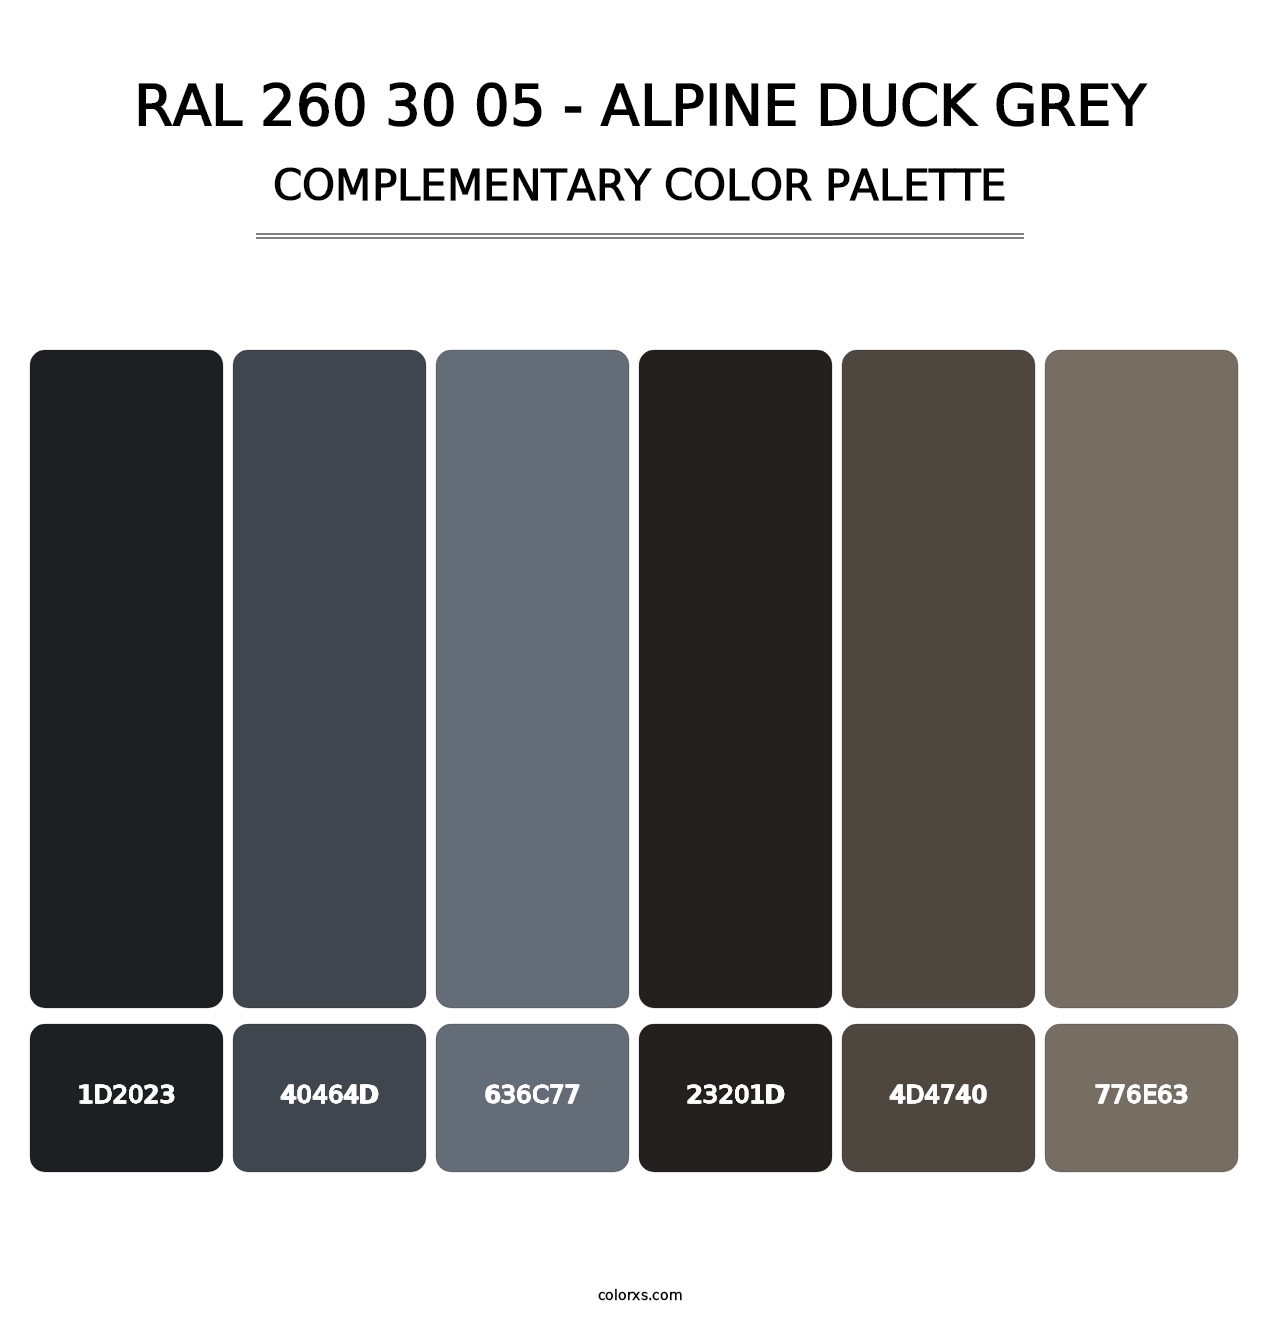 RAL 260 30 05 - Alpine Duck Grey - Complementary Color Palette